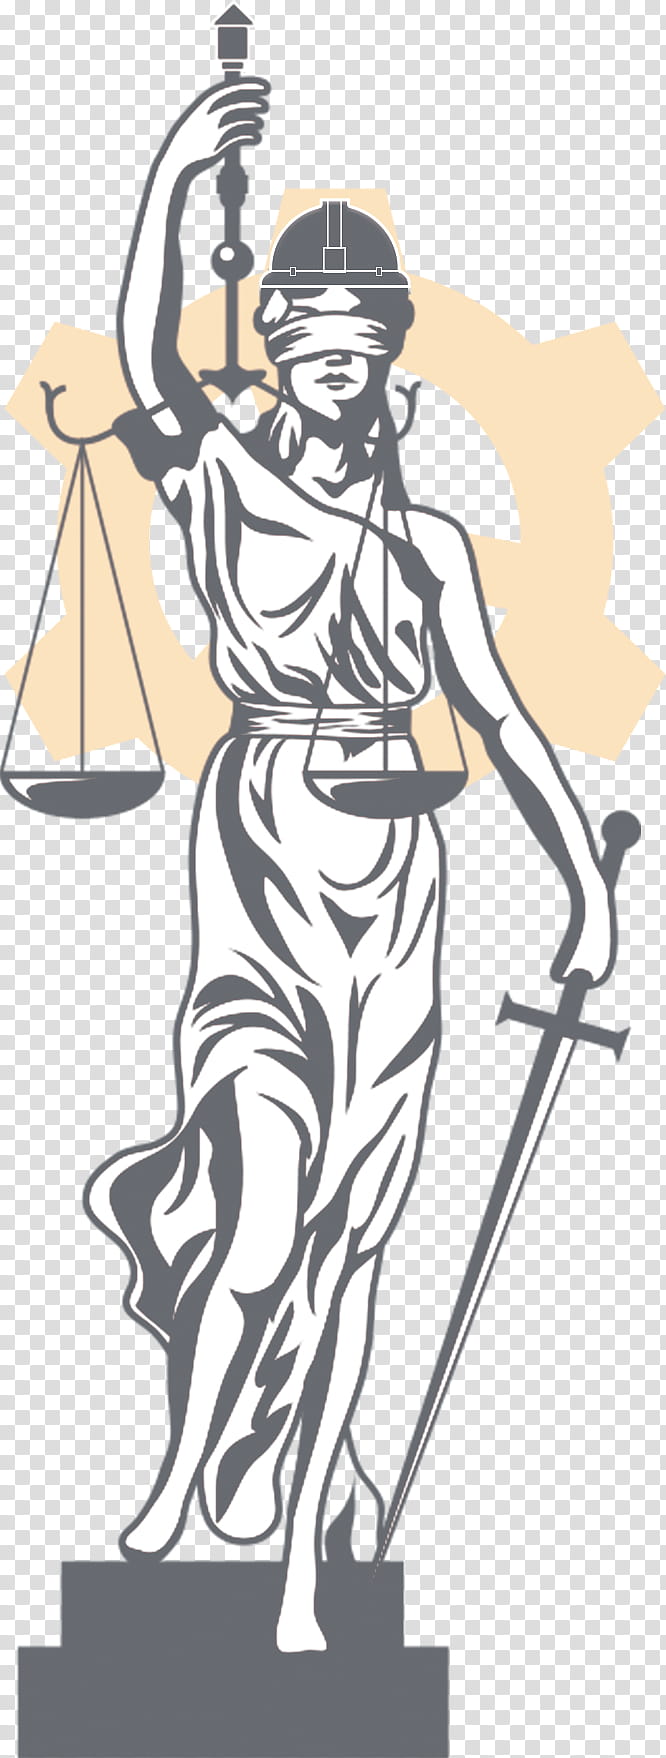 Lady Justice Line Art, Lawyer, Drawing, Law Firm, Costume Design, Style transparent background PNG clipart